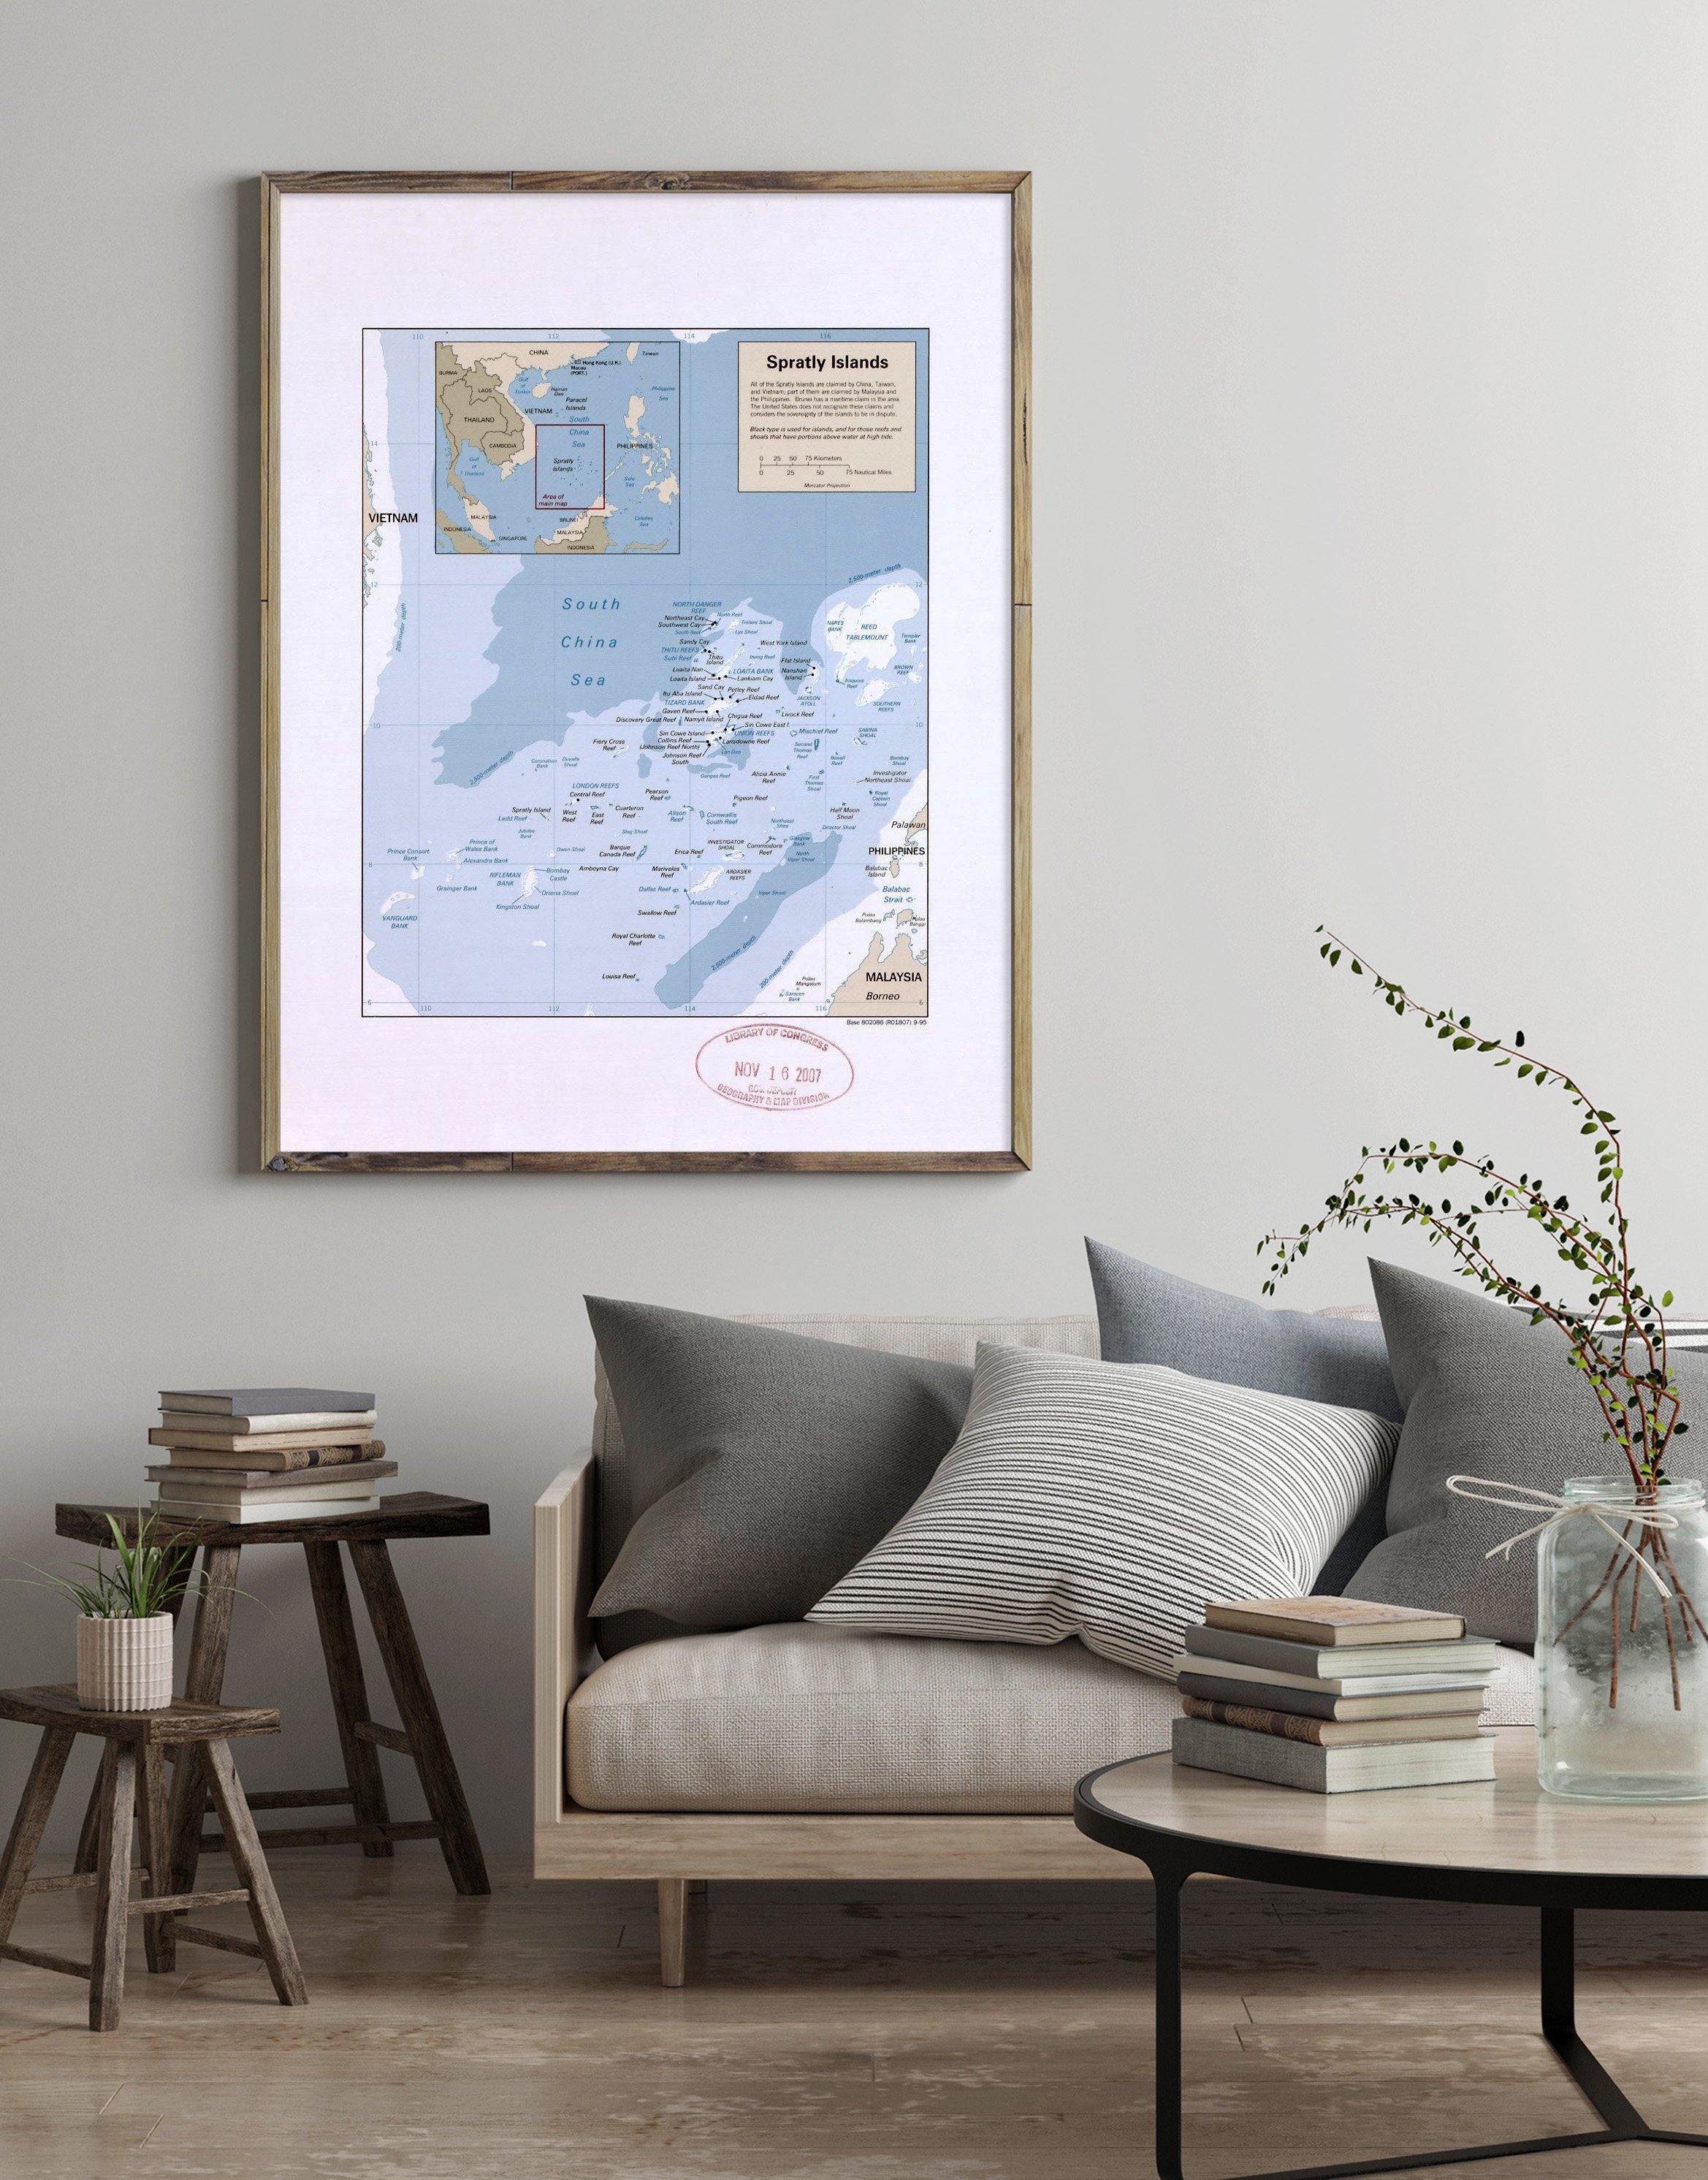 1995 Map| Spratly Islands| Spratly Islands Map Size: 18 inches x 24 in - New York Map Company